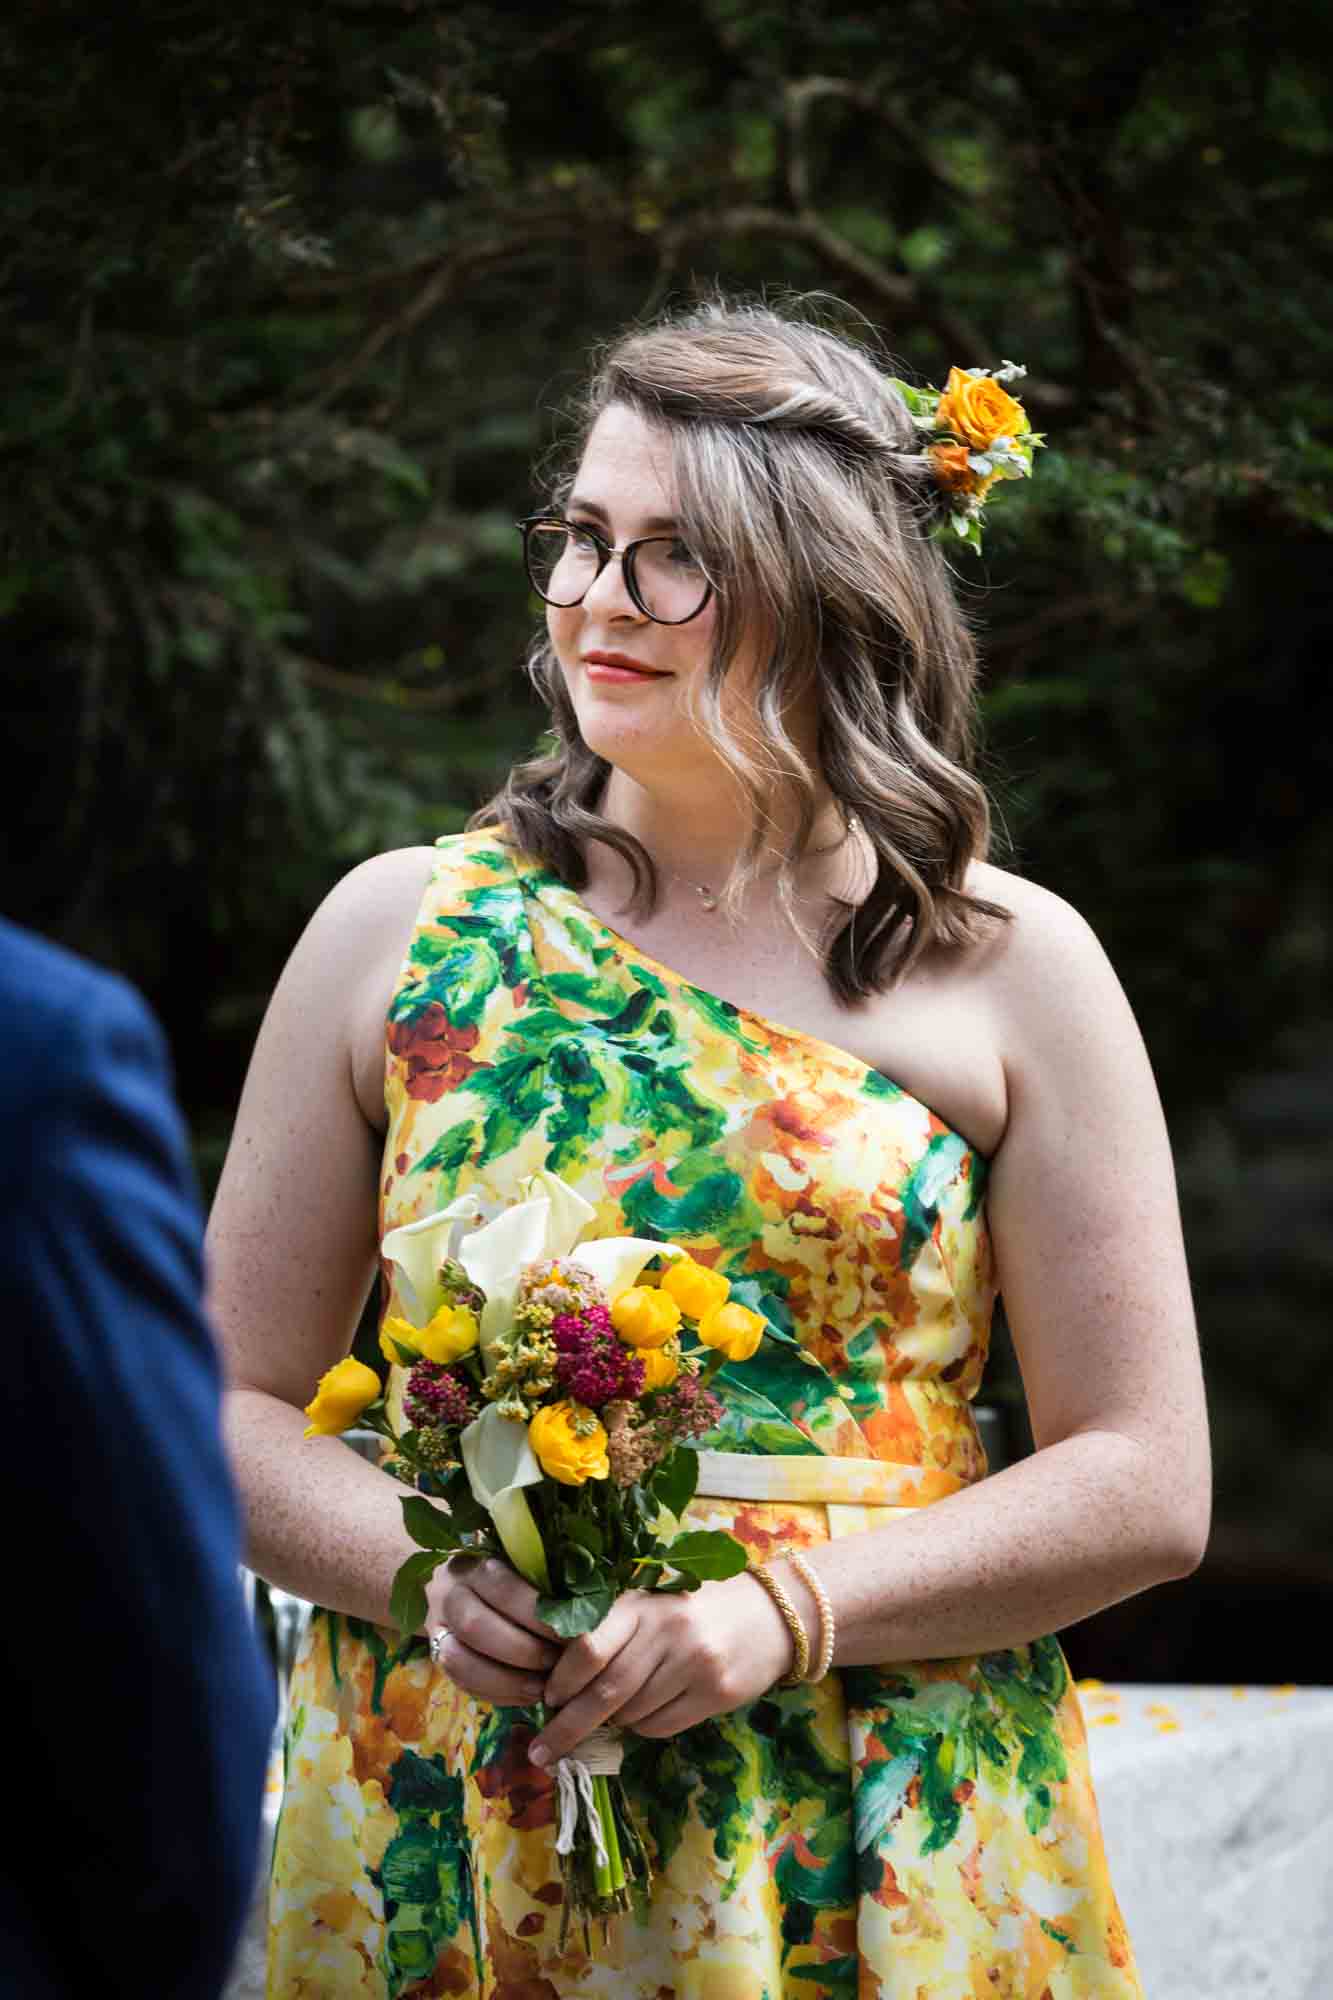 Bride wearing yellow dress and holding yellow flowers for an article on how to select a wedding date